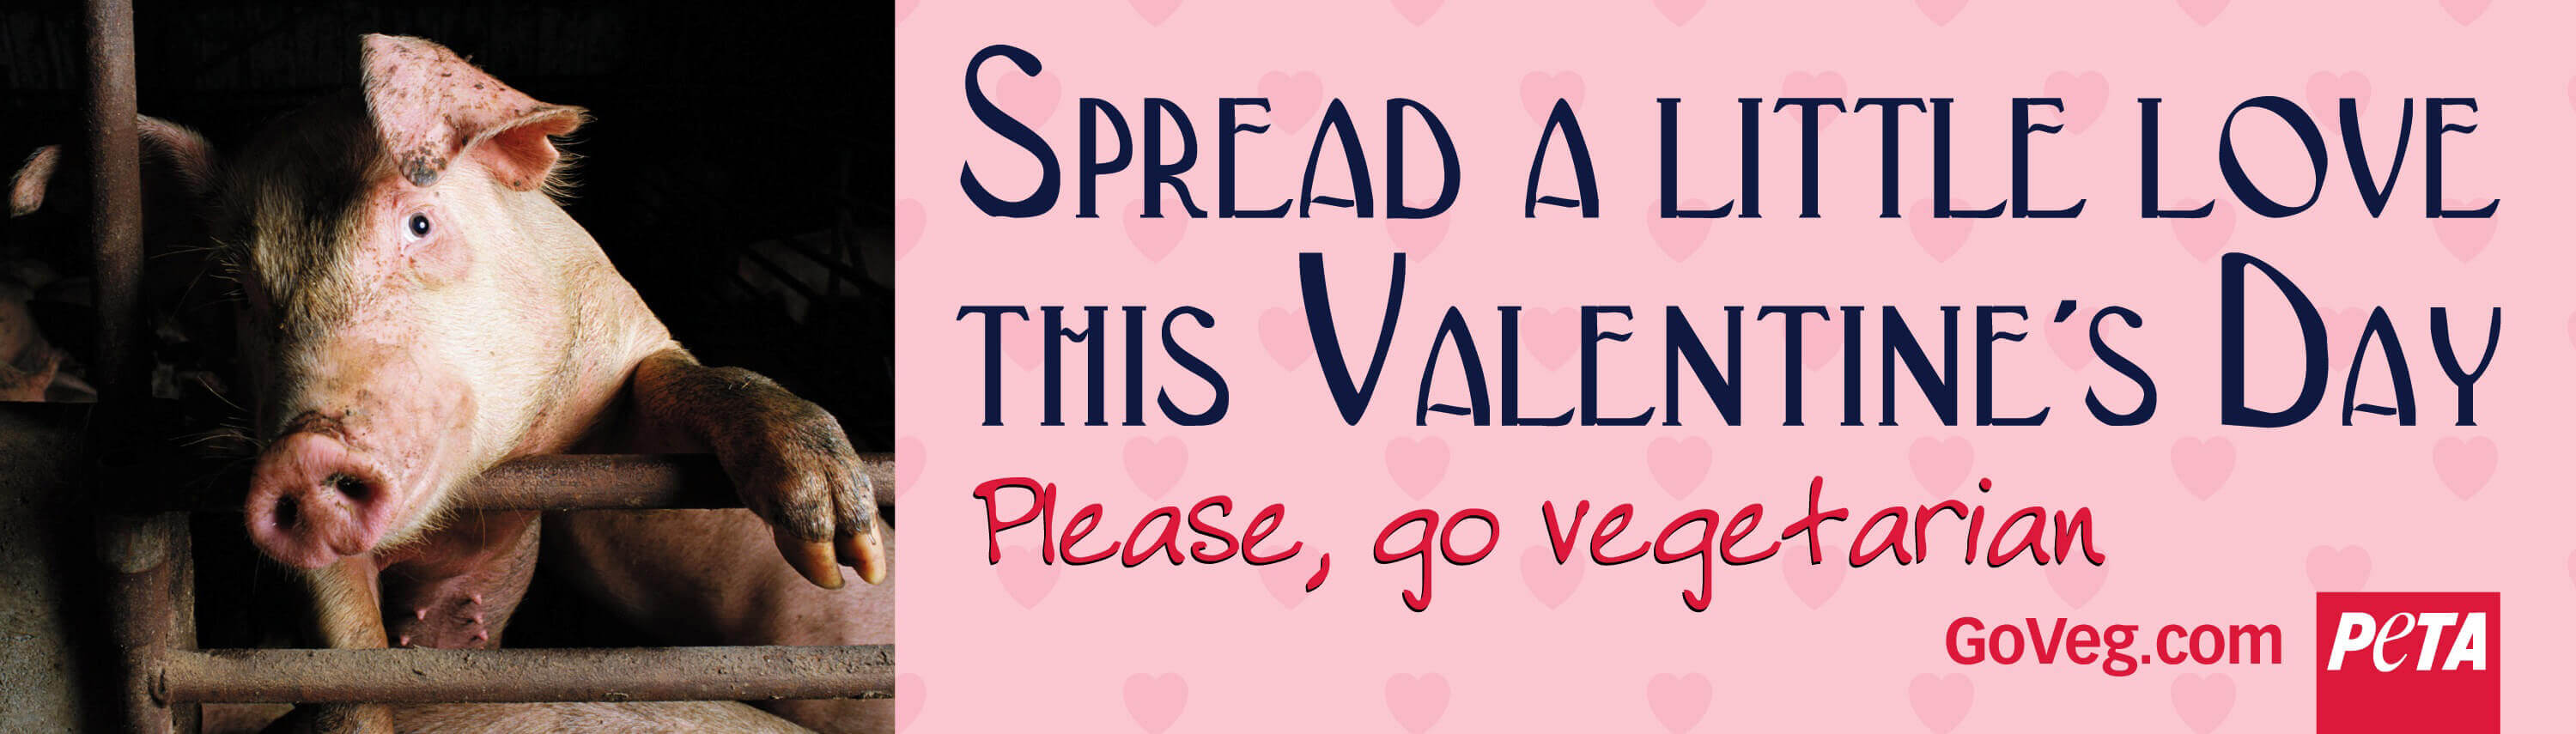 Spread a Little Love This Valentine's Day